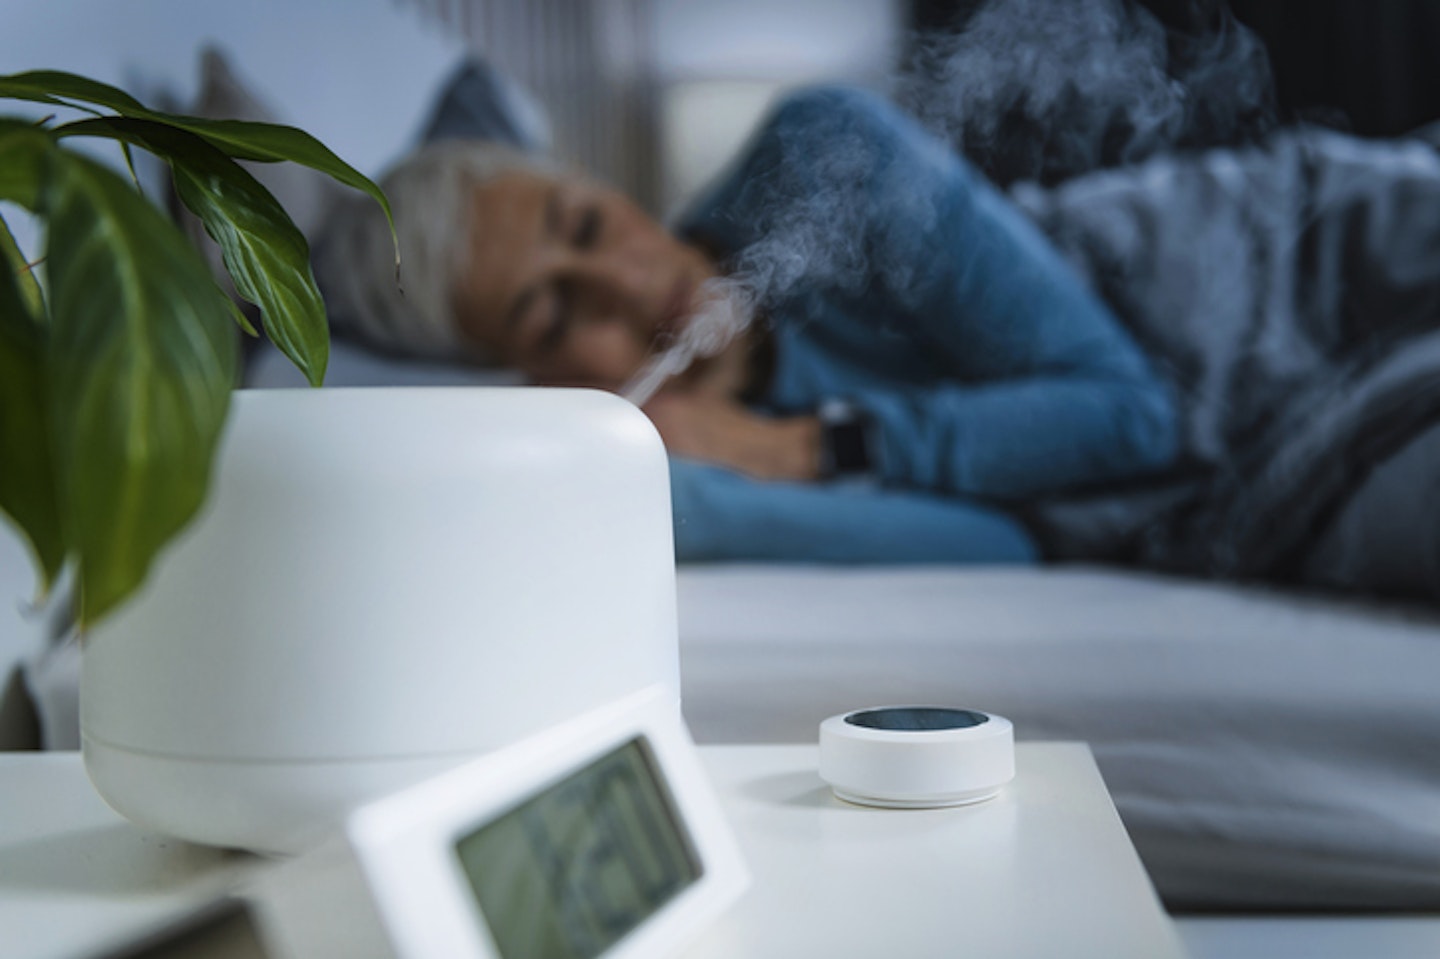 Air humidifier in bedroom